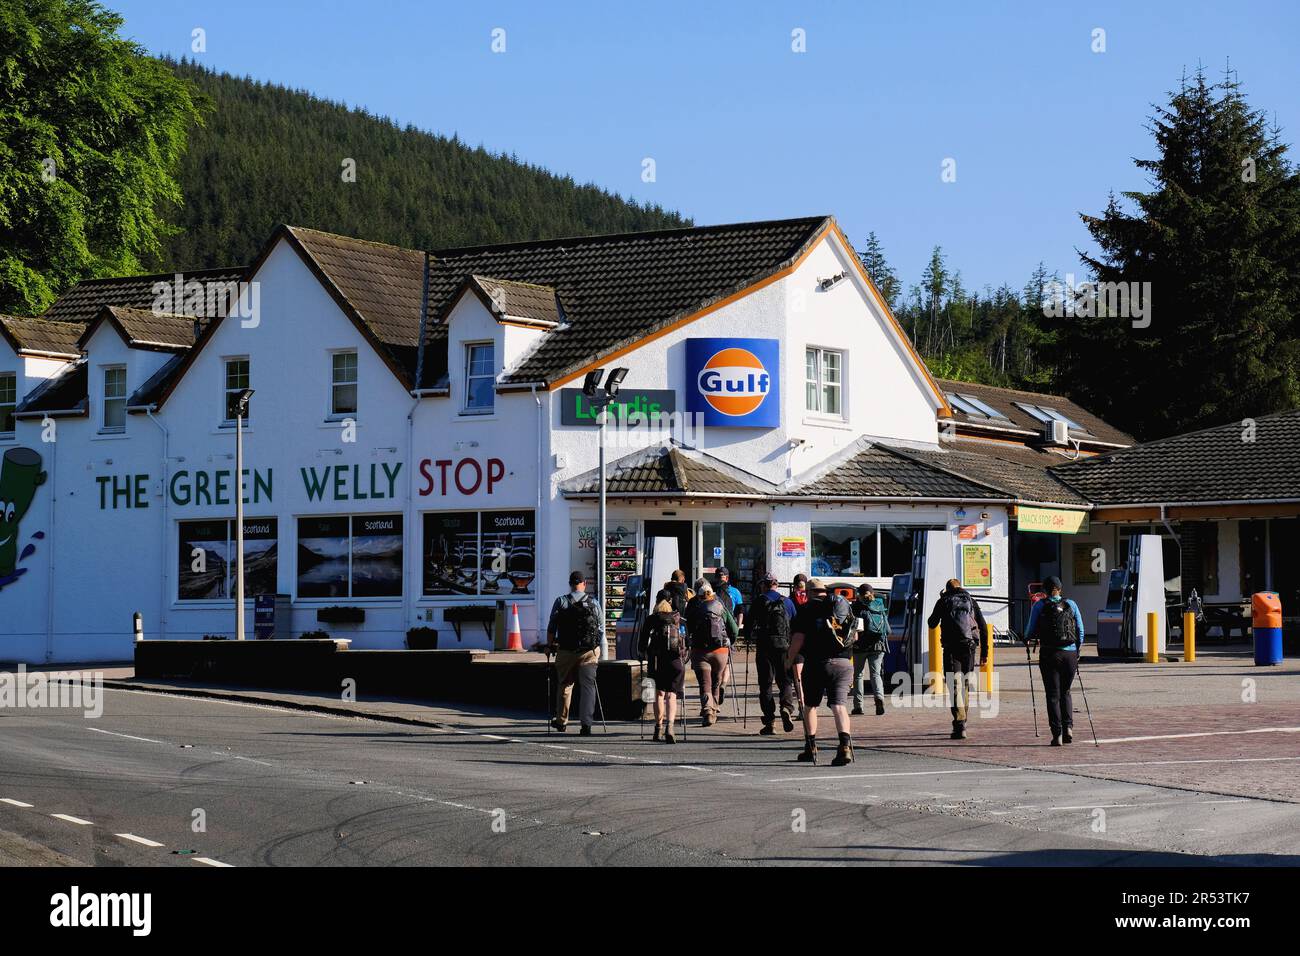 Group of Walkers at The Green Welly Stop, Tyndrum, Scotland Stock Photo